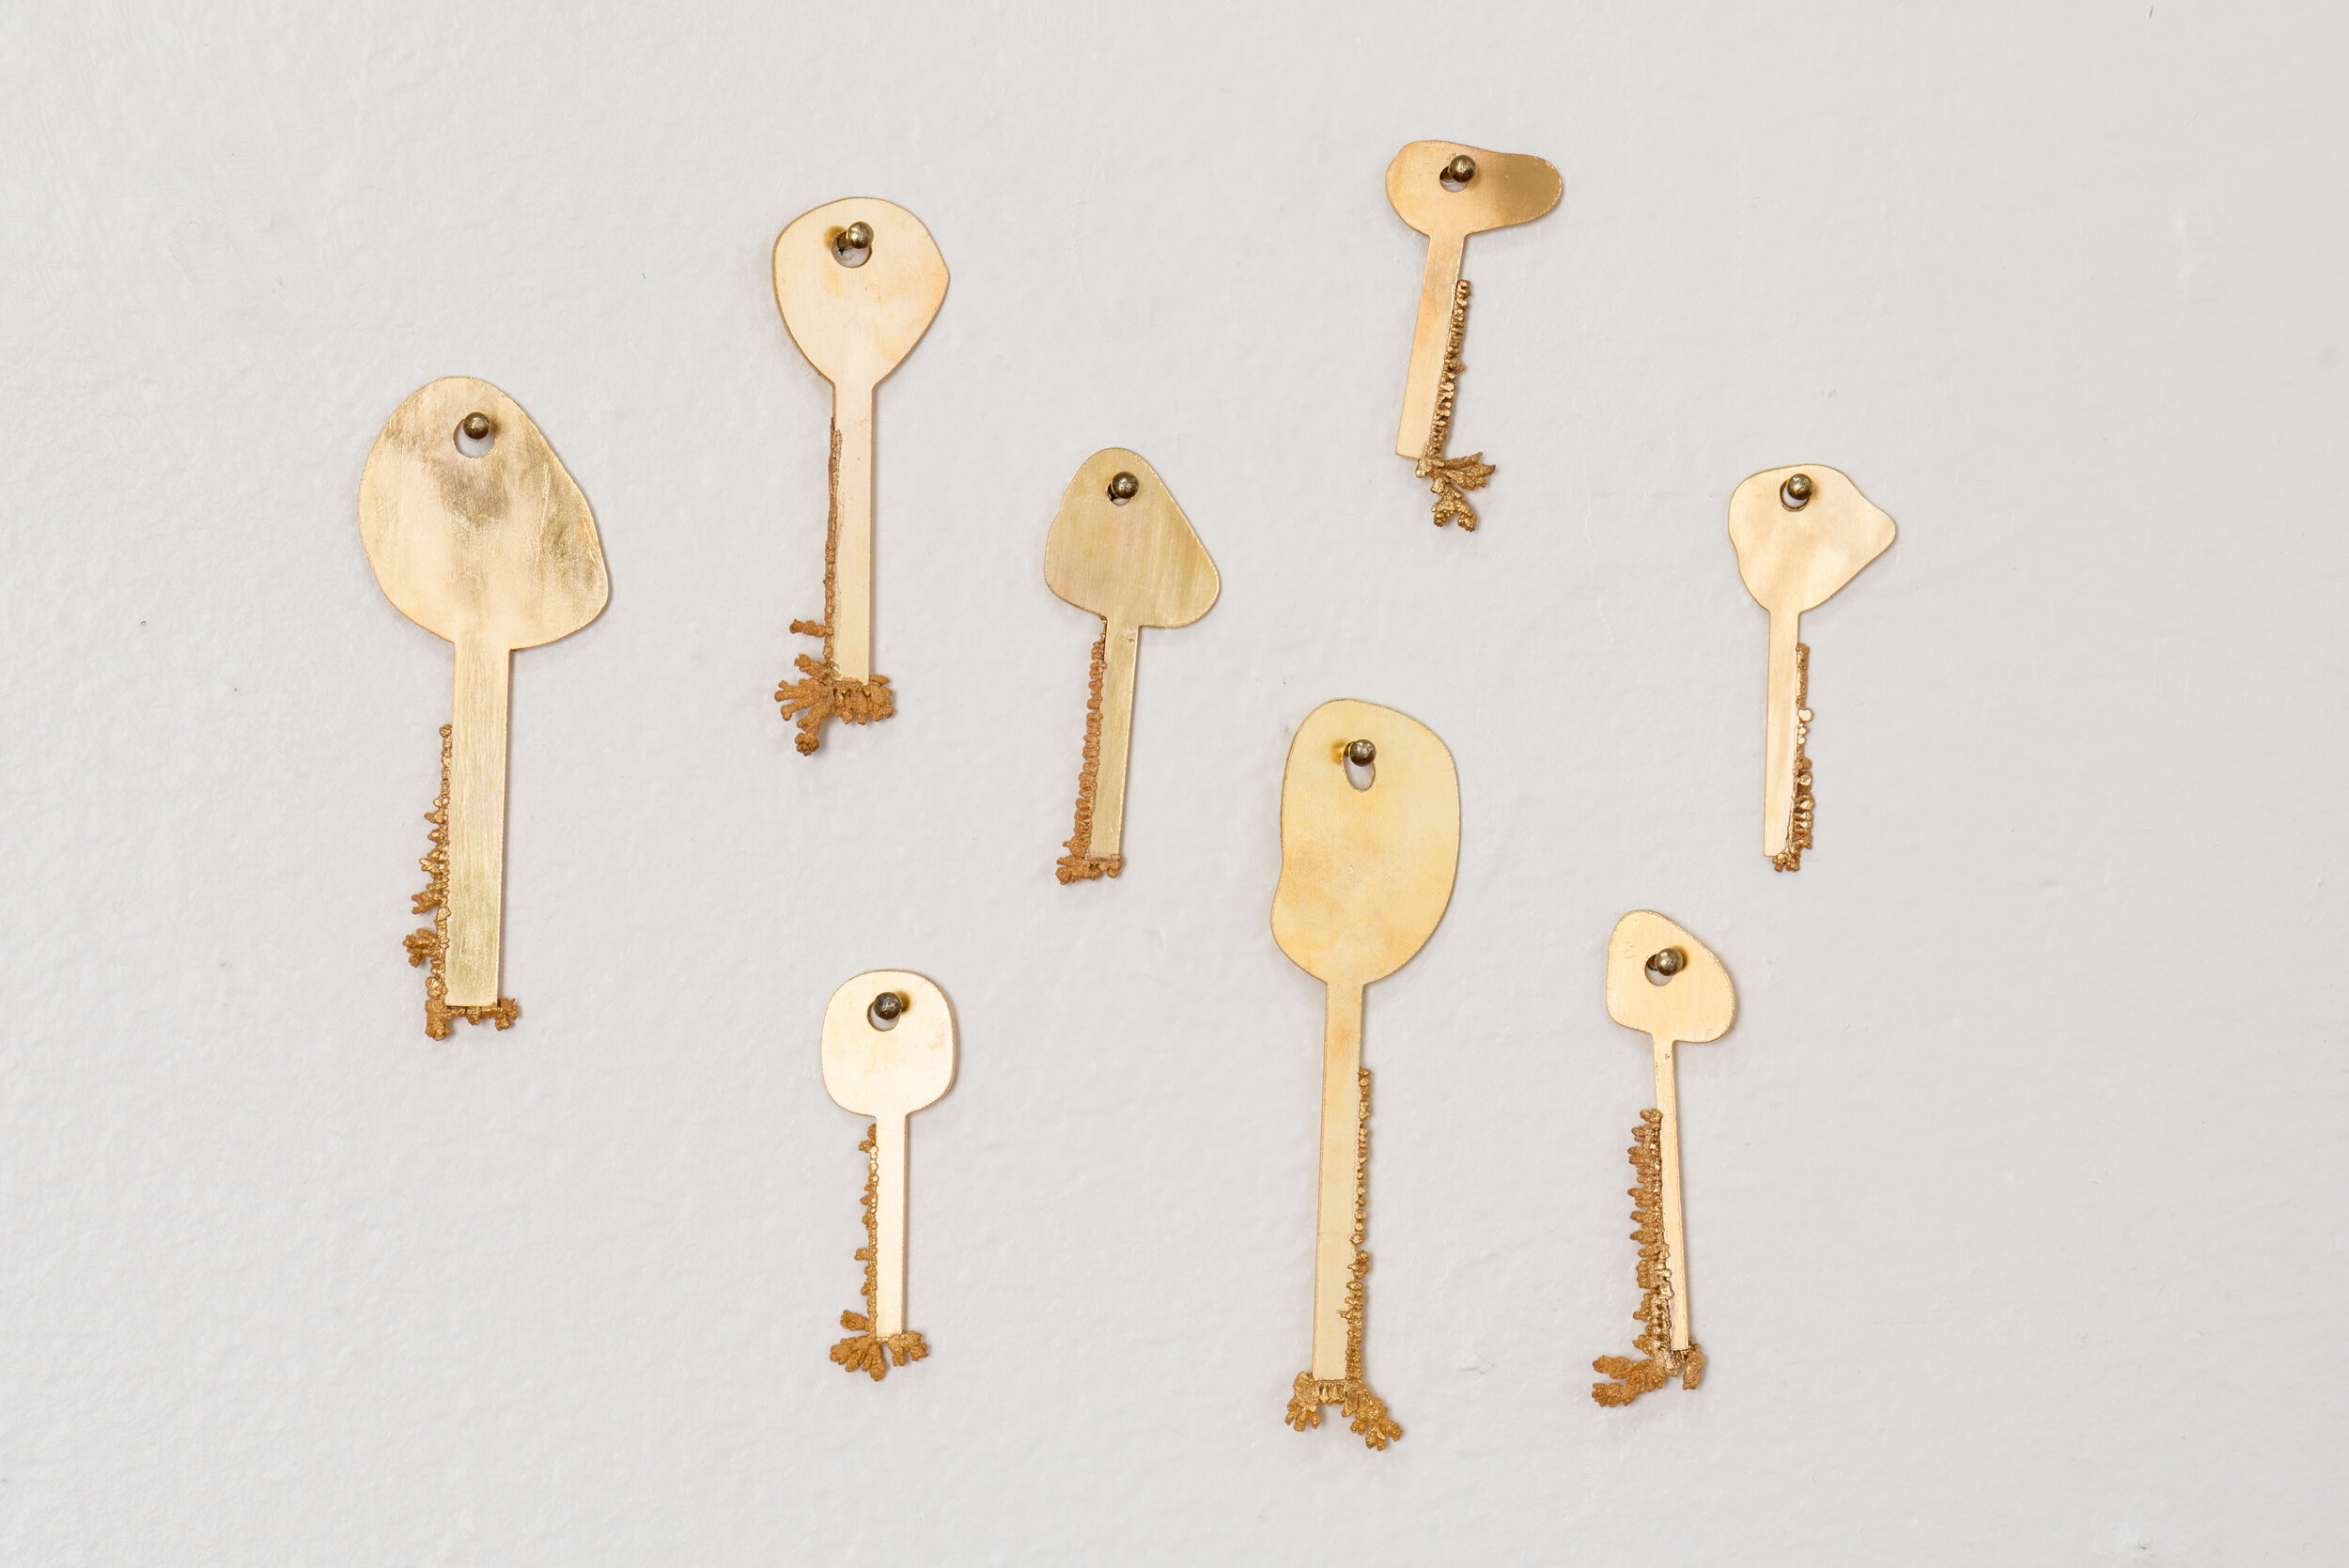   Keys (for Future Lock) , 24K gold plated copper, 2019. 